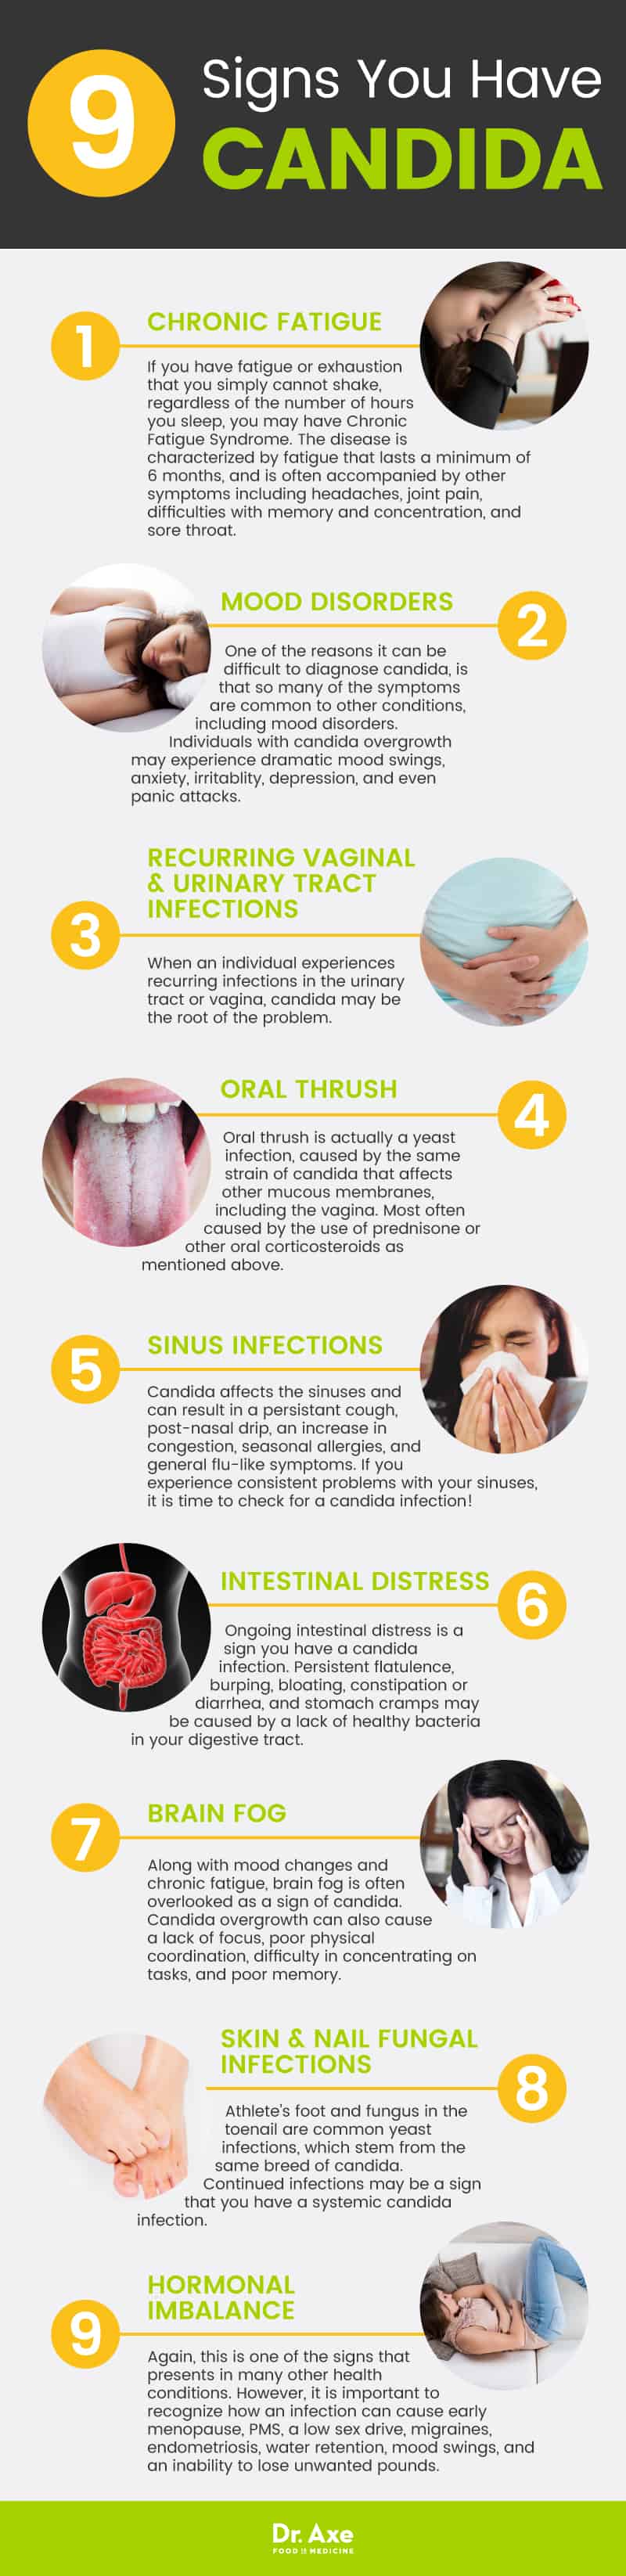 Candida symptoms: 9 signs - Dr. Axe